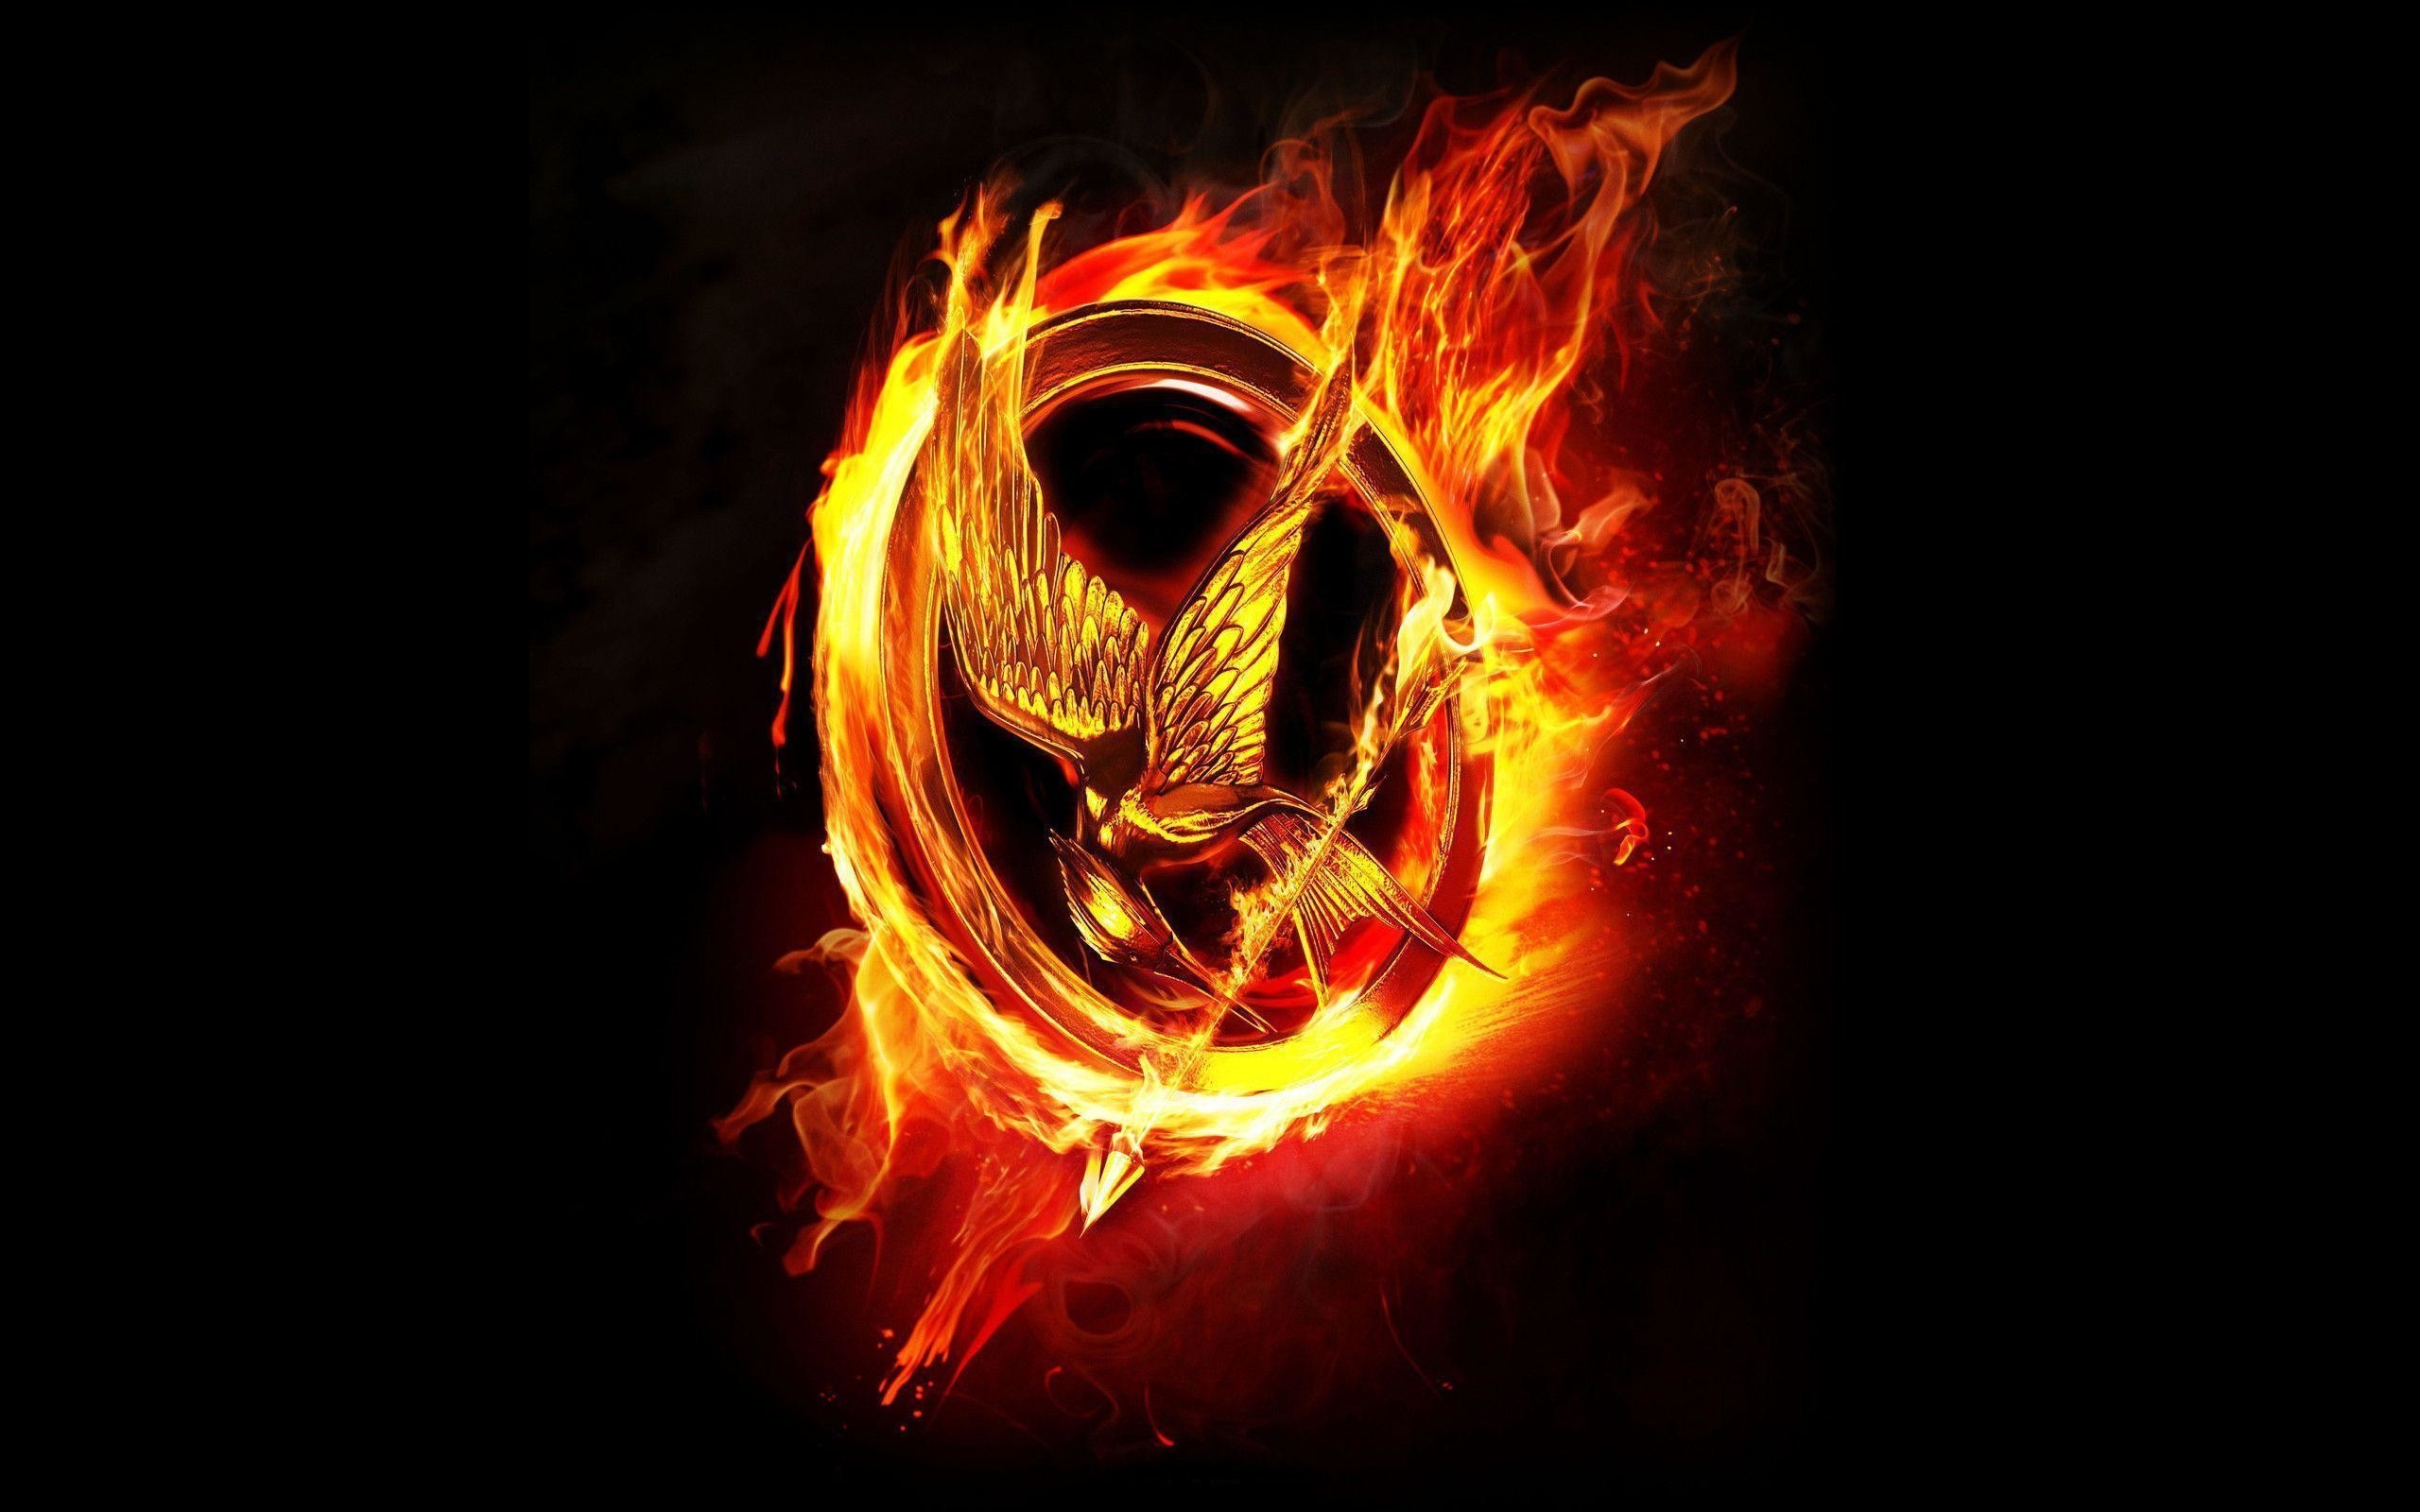 Hunger Games: Mockingjay - Part 1 was released in 2014 and Mockingjay - Part 2 was released in 2015. 2560x1600 HD Wallpaper.